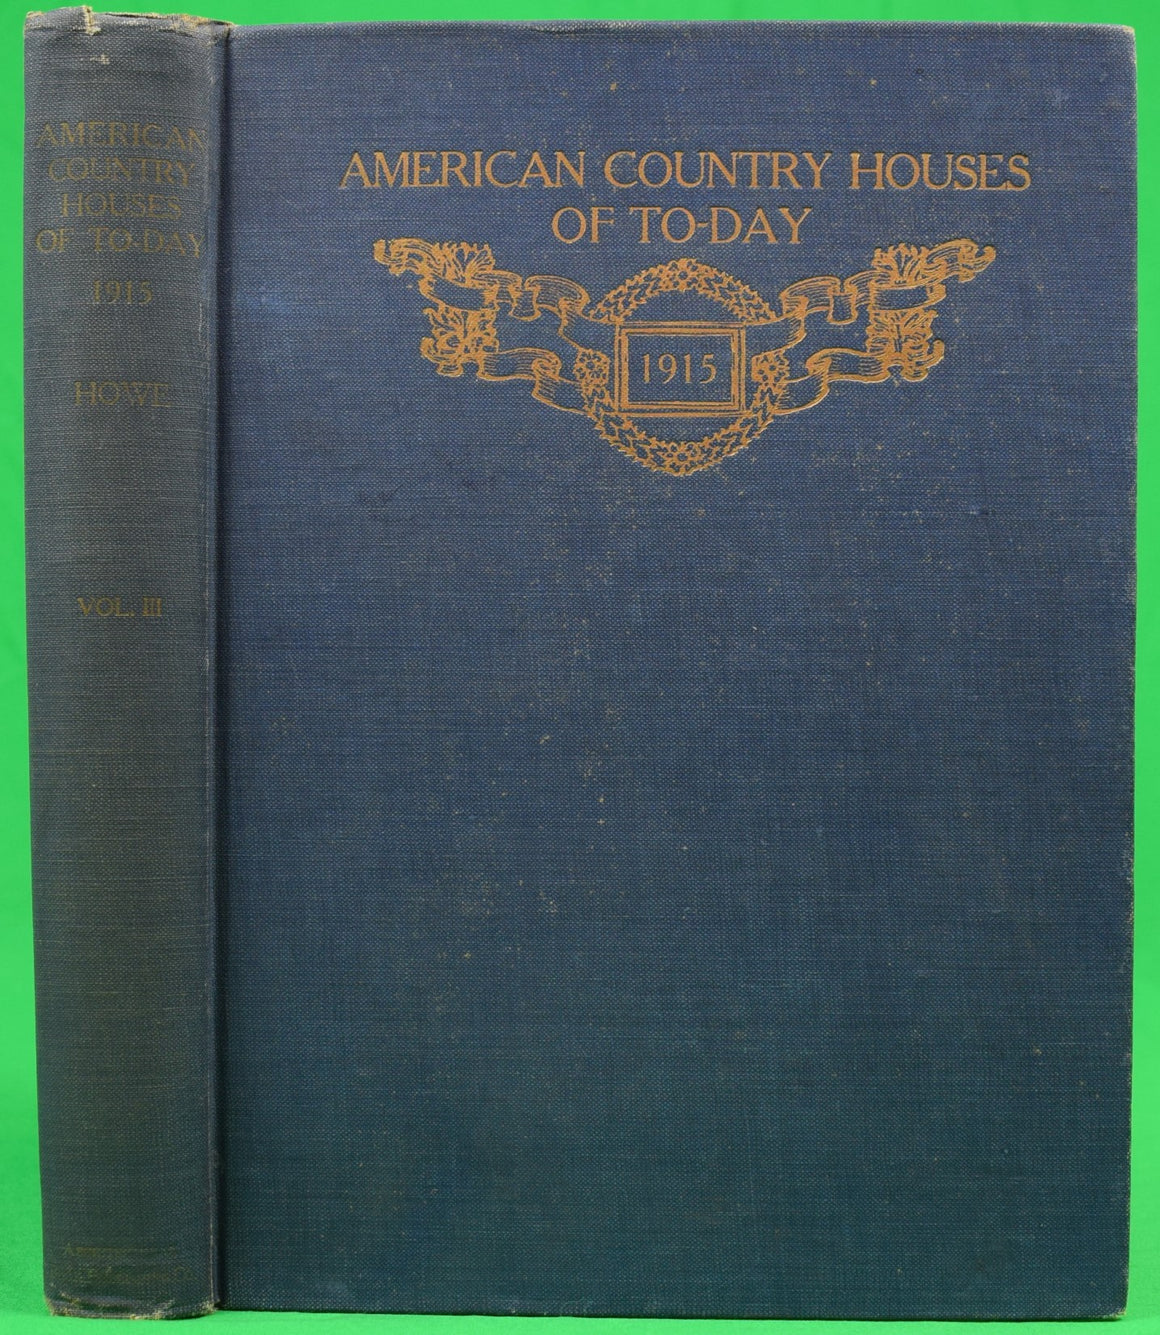 "American Country Houses Of To-Day" 1915 HOWE, Samuel